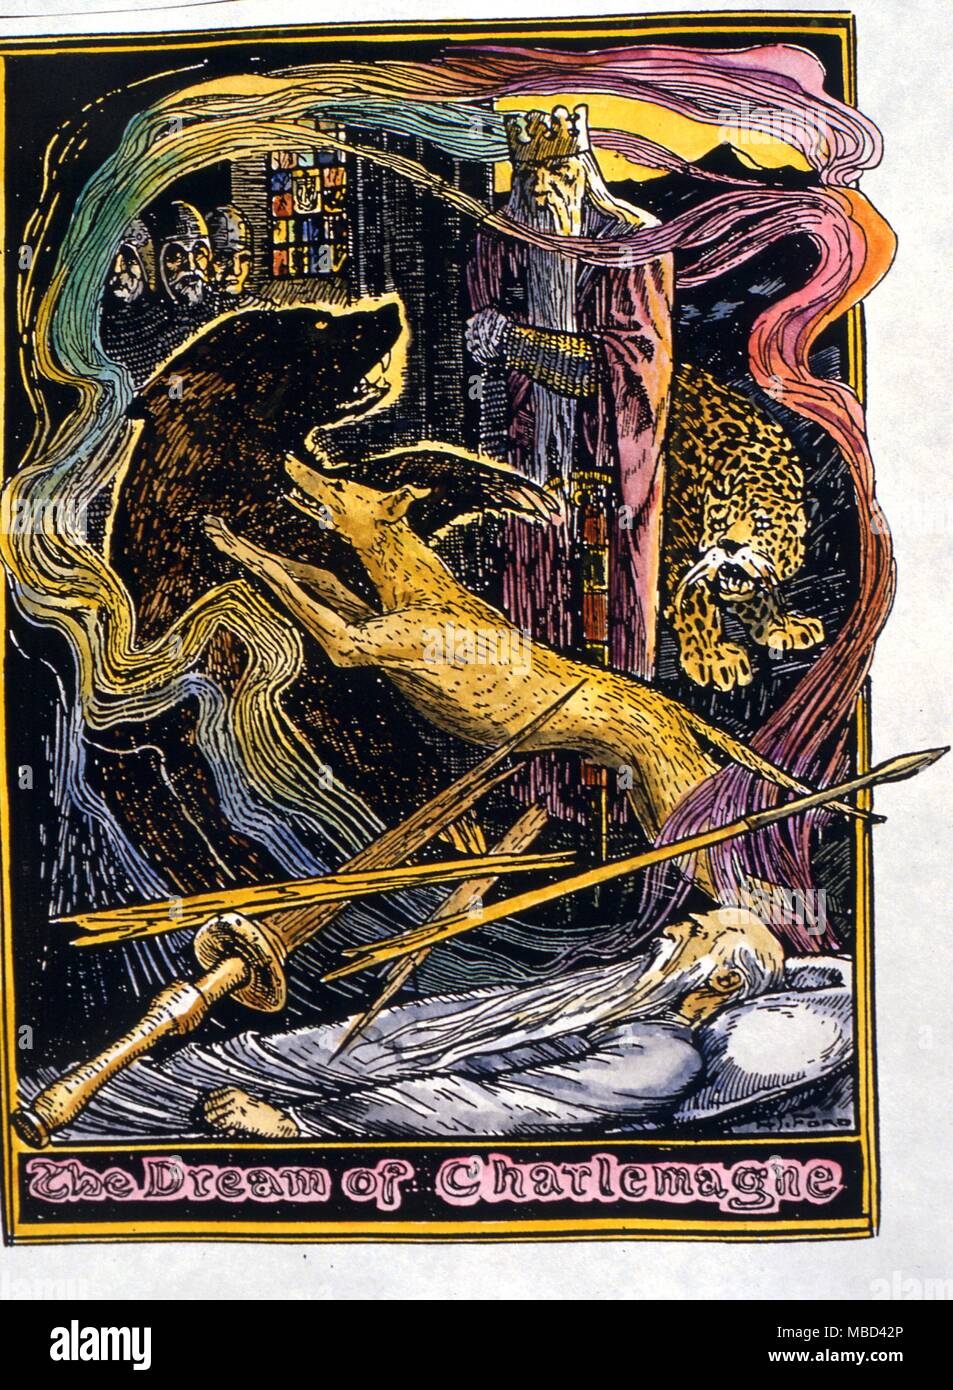 Dreams and nightmares - The dream of Charlemagne in which the king is saved from a bear and leopard by a greyhound. Illustration by Ford after Andrew Lang's Book of Romance 1902 edition. - ©Charles Walker / Stock Photo